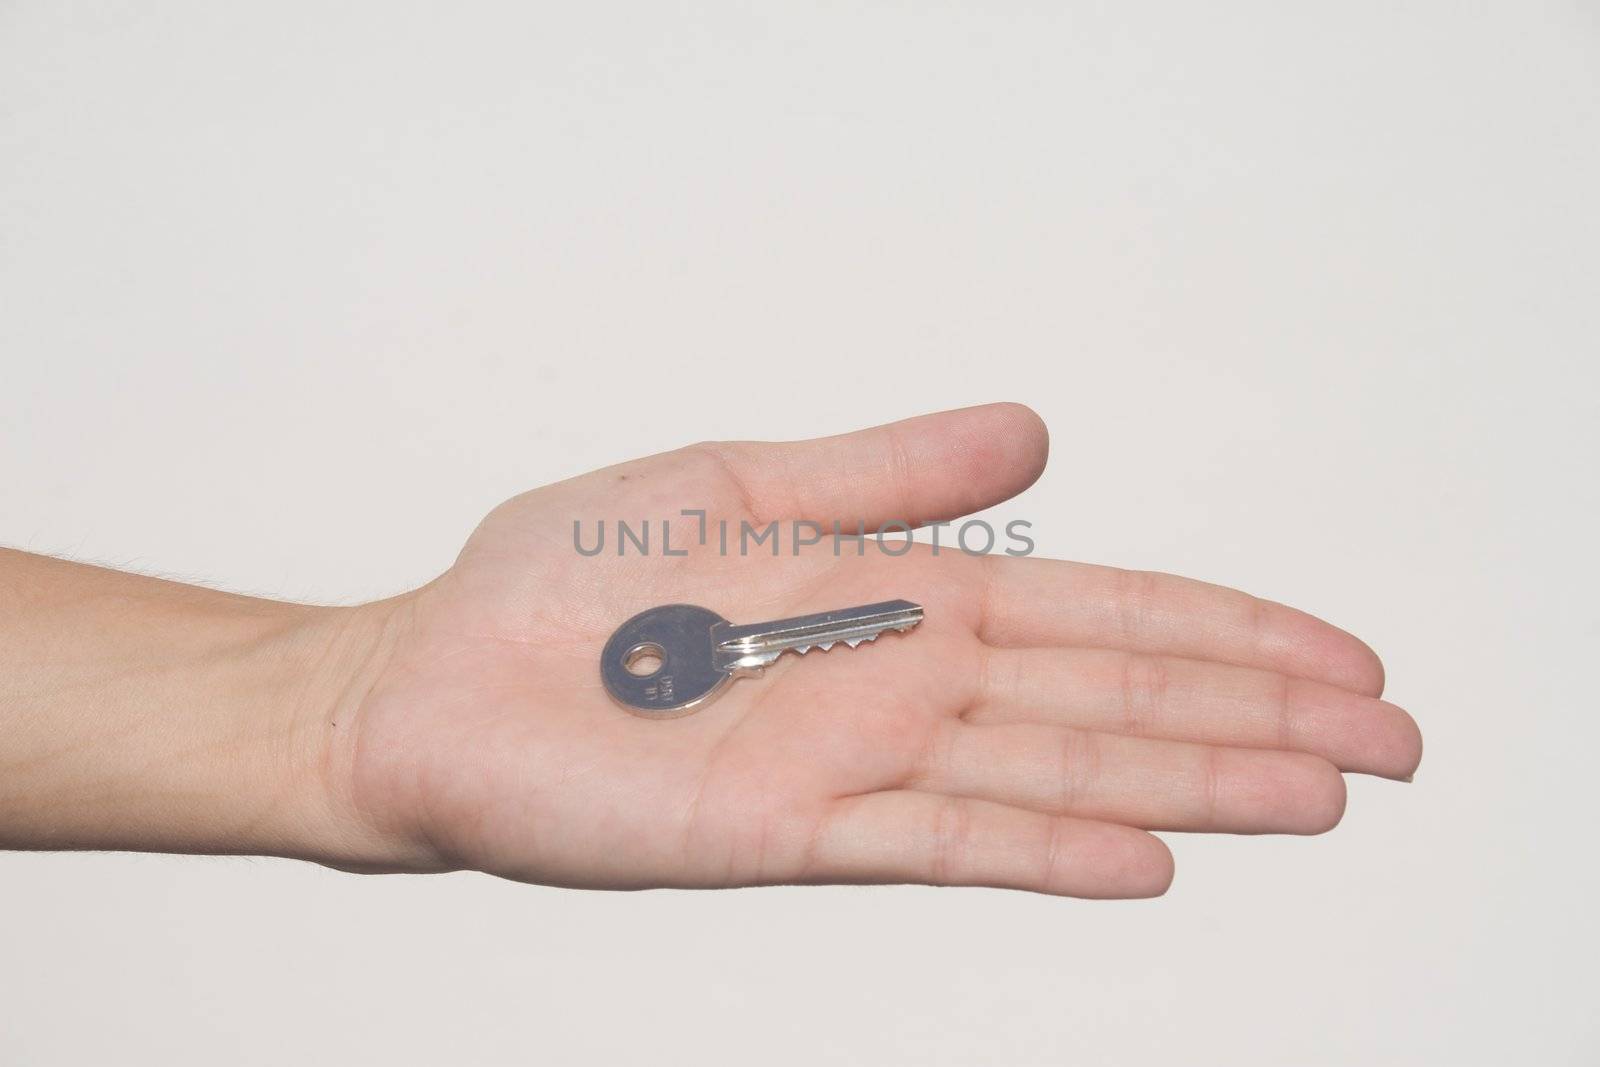 Extended hand with house key in palm against white background